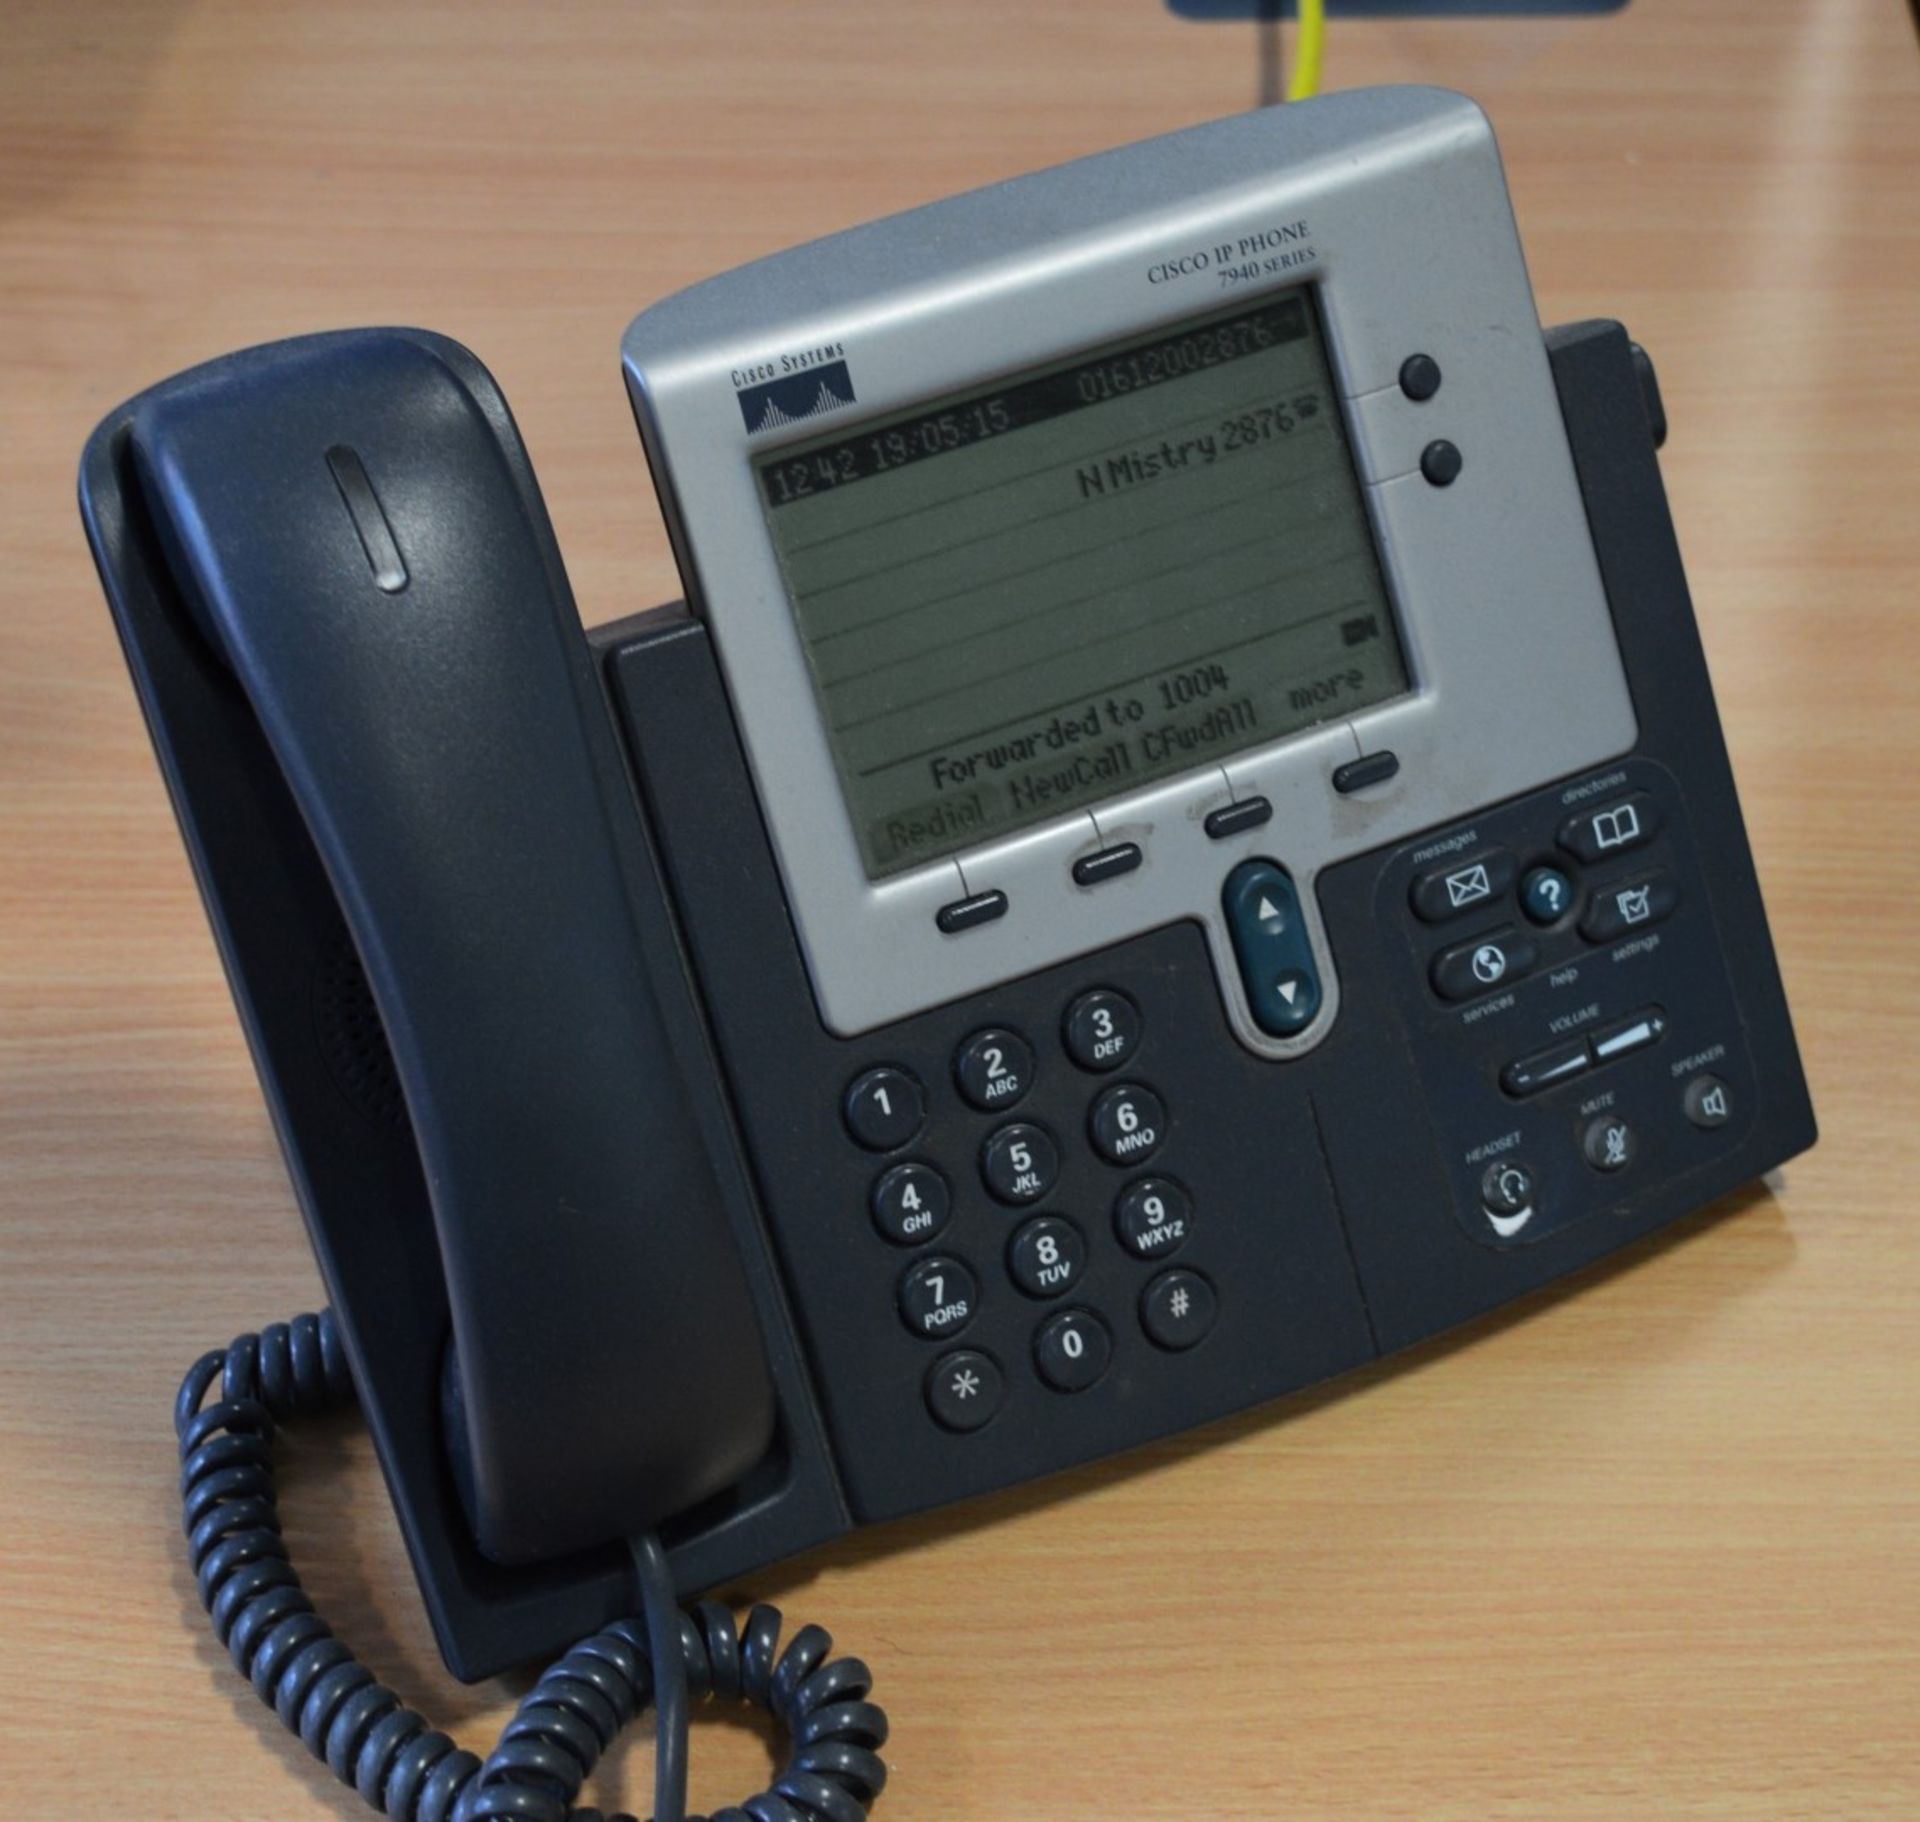 4 x Cisco 7940 Unified VoIP Business IP Phone Handsets - From Working Office Environment - Ref - Image 2 of 2